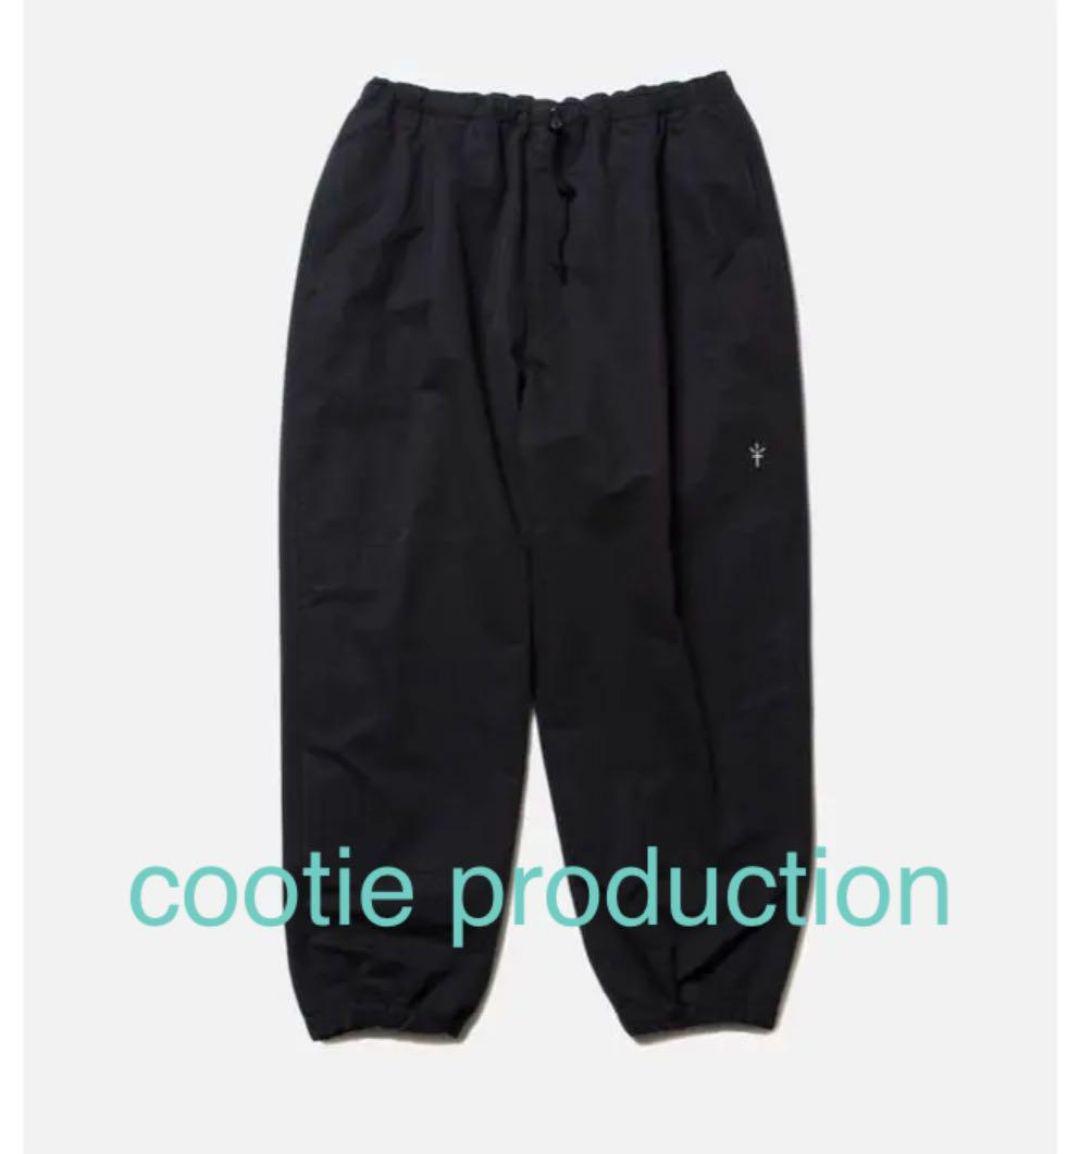 COOTIE Inlay Sweat 1 Tuck Easy Pants パンツ その他 le-routeur-wifi.com